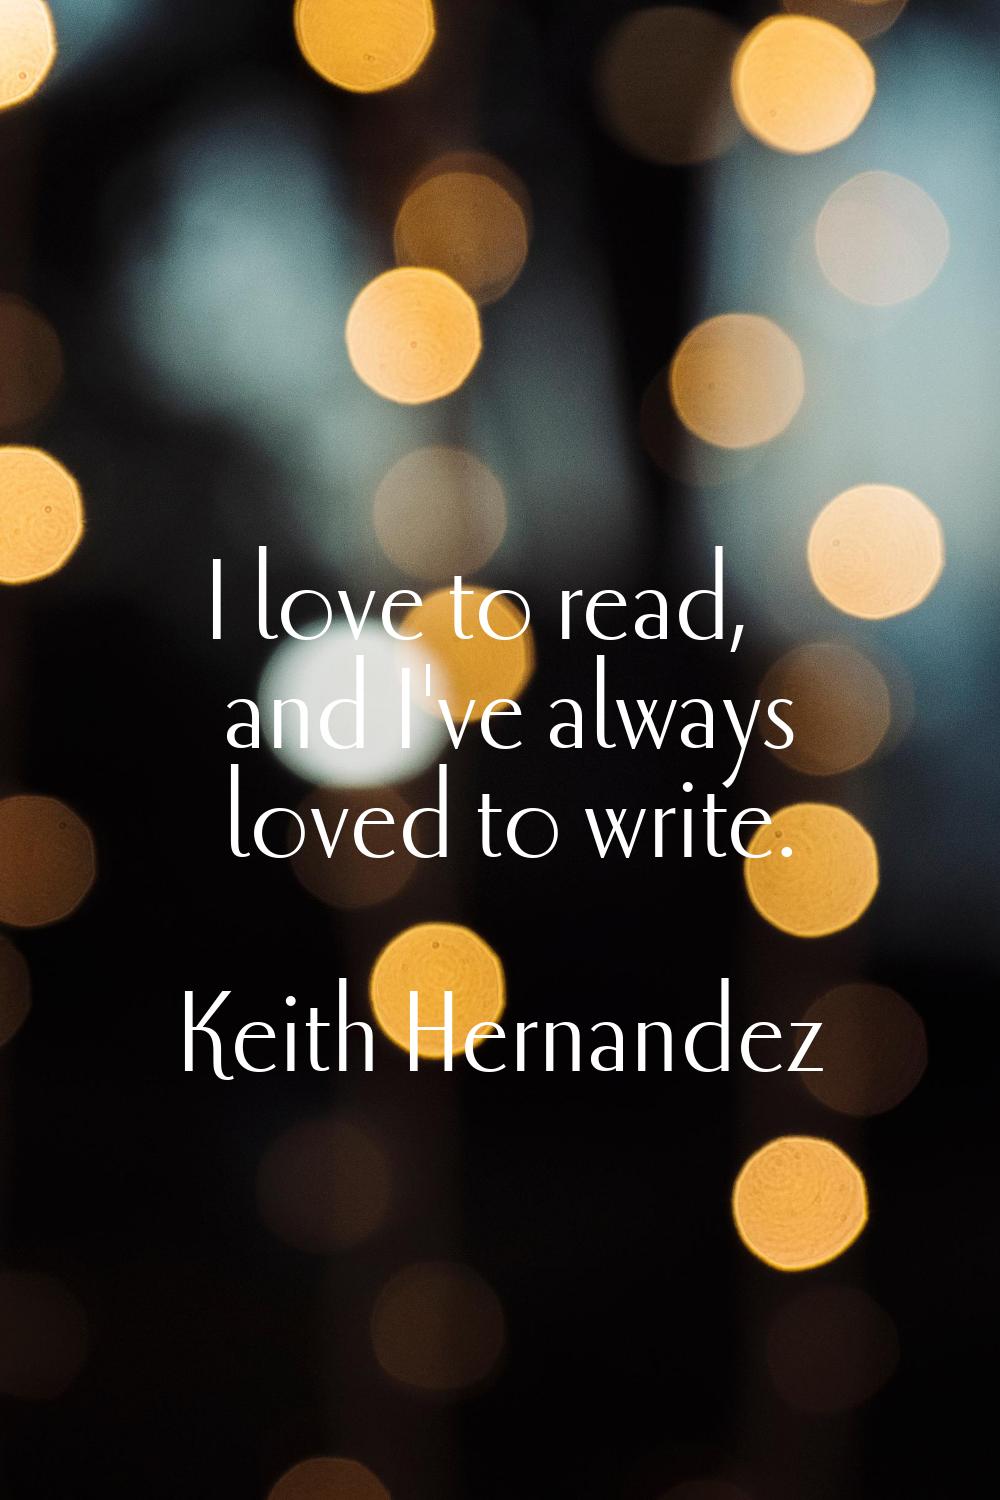 I love to read, and I've always loved to write.